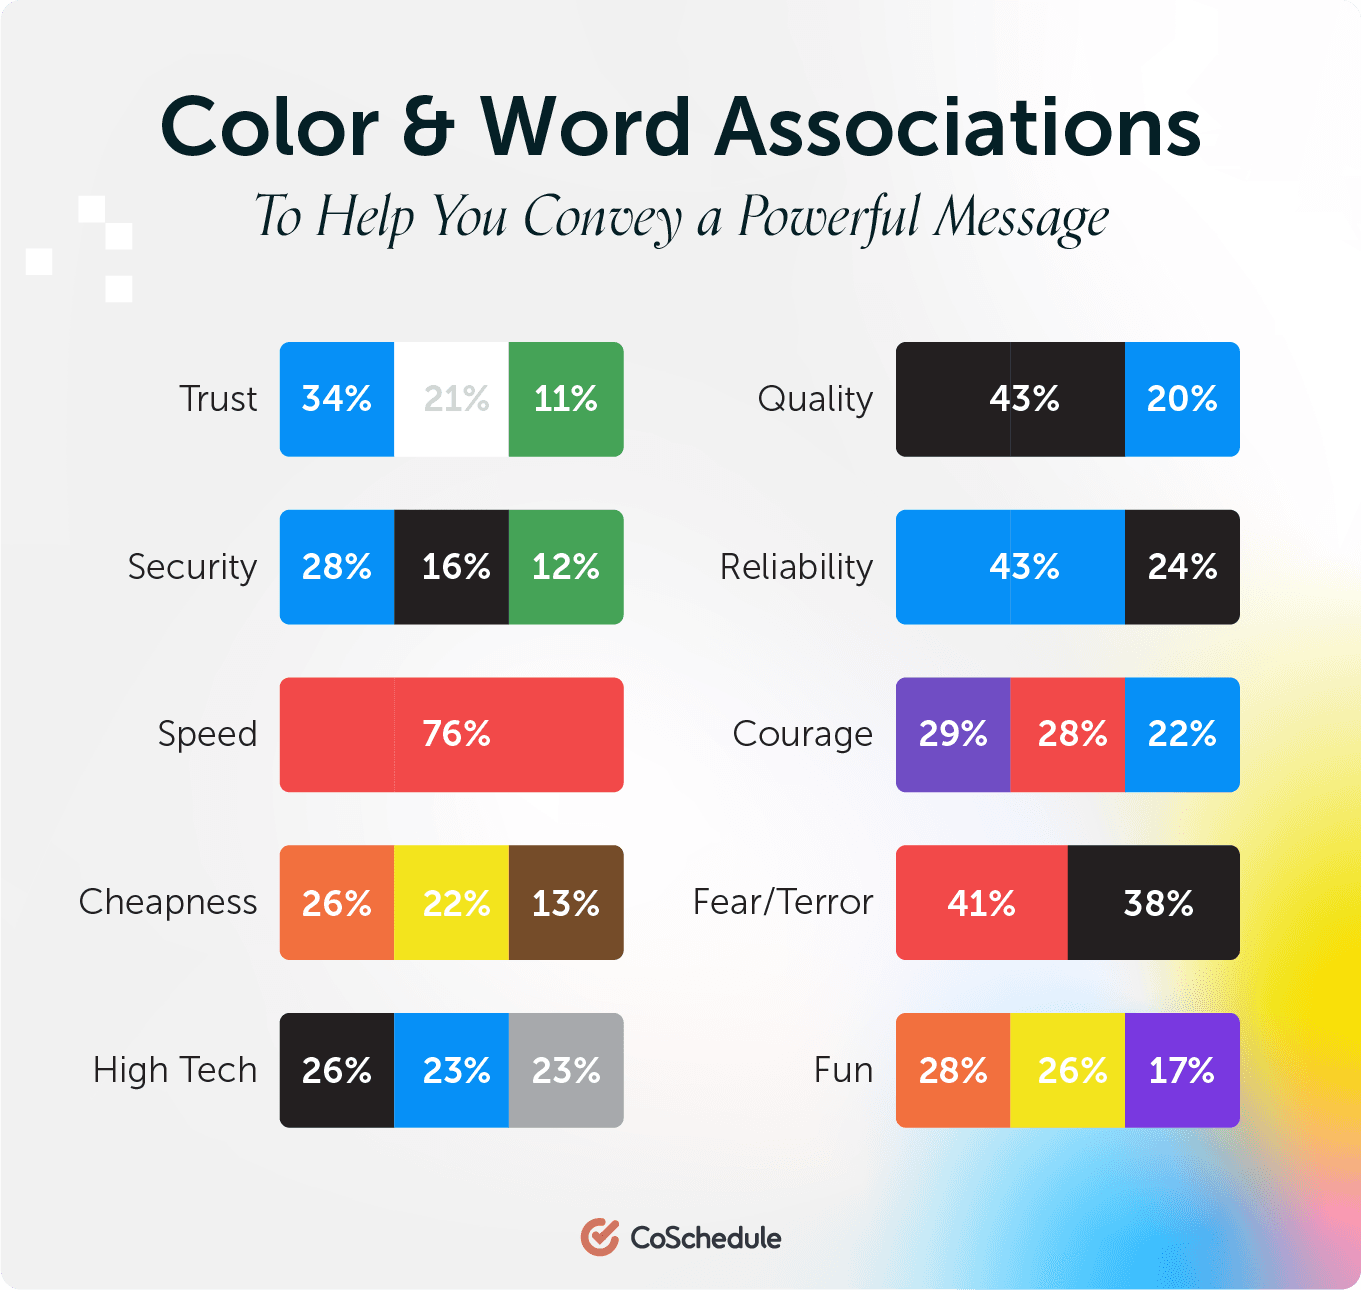 Colors and word associations